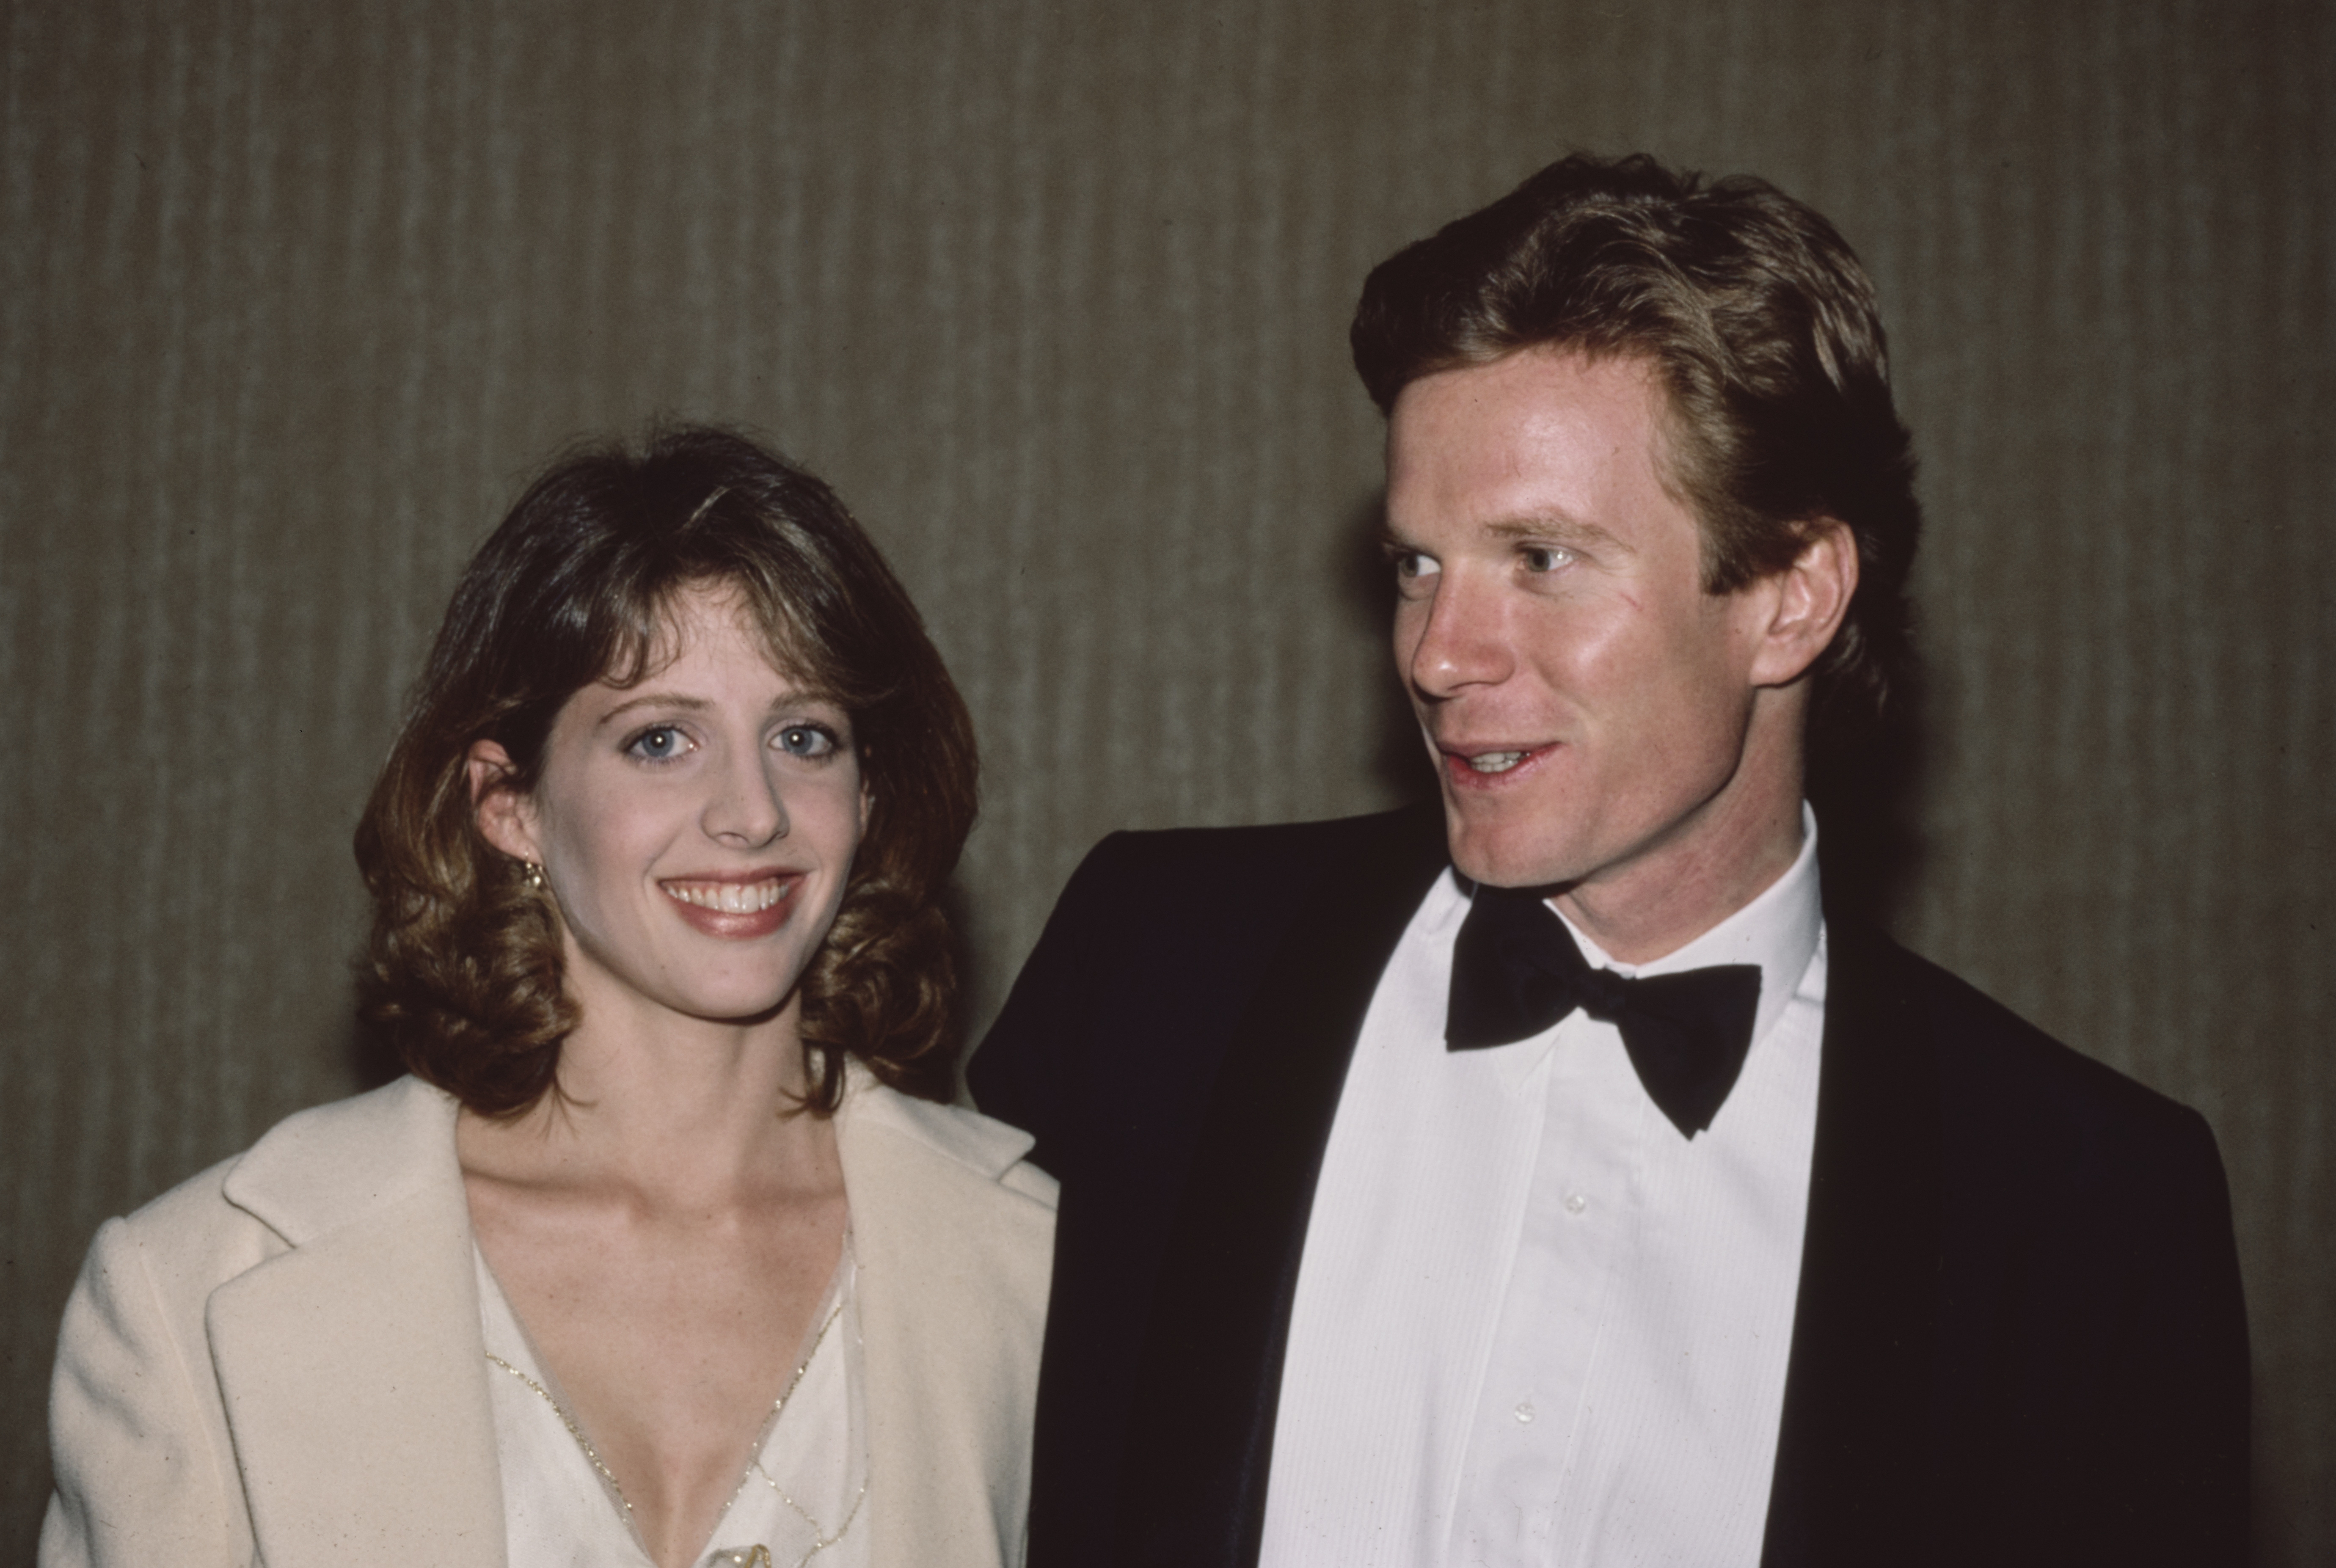 William Moses and Tracy Nelson in the United States in 1993 | Source: Getty Images